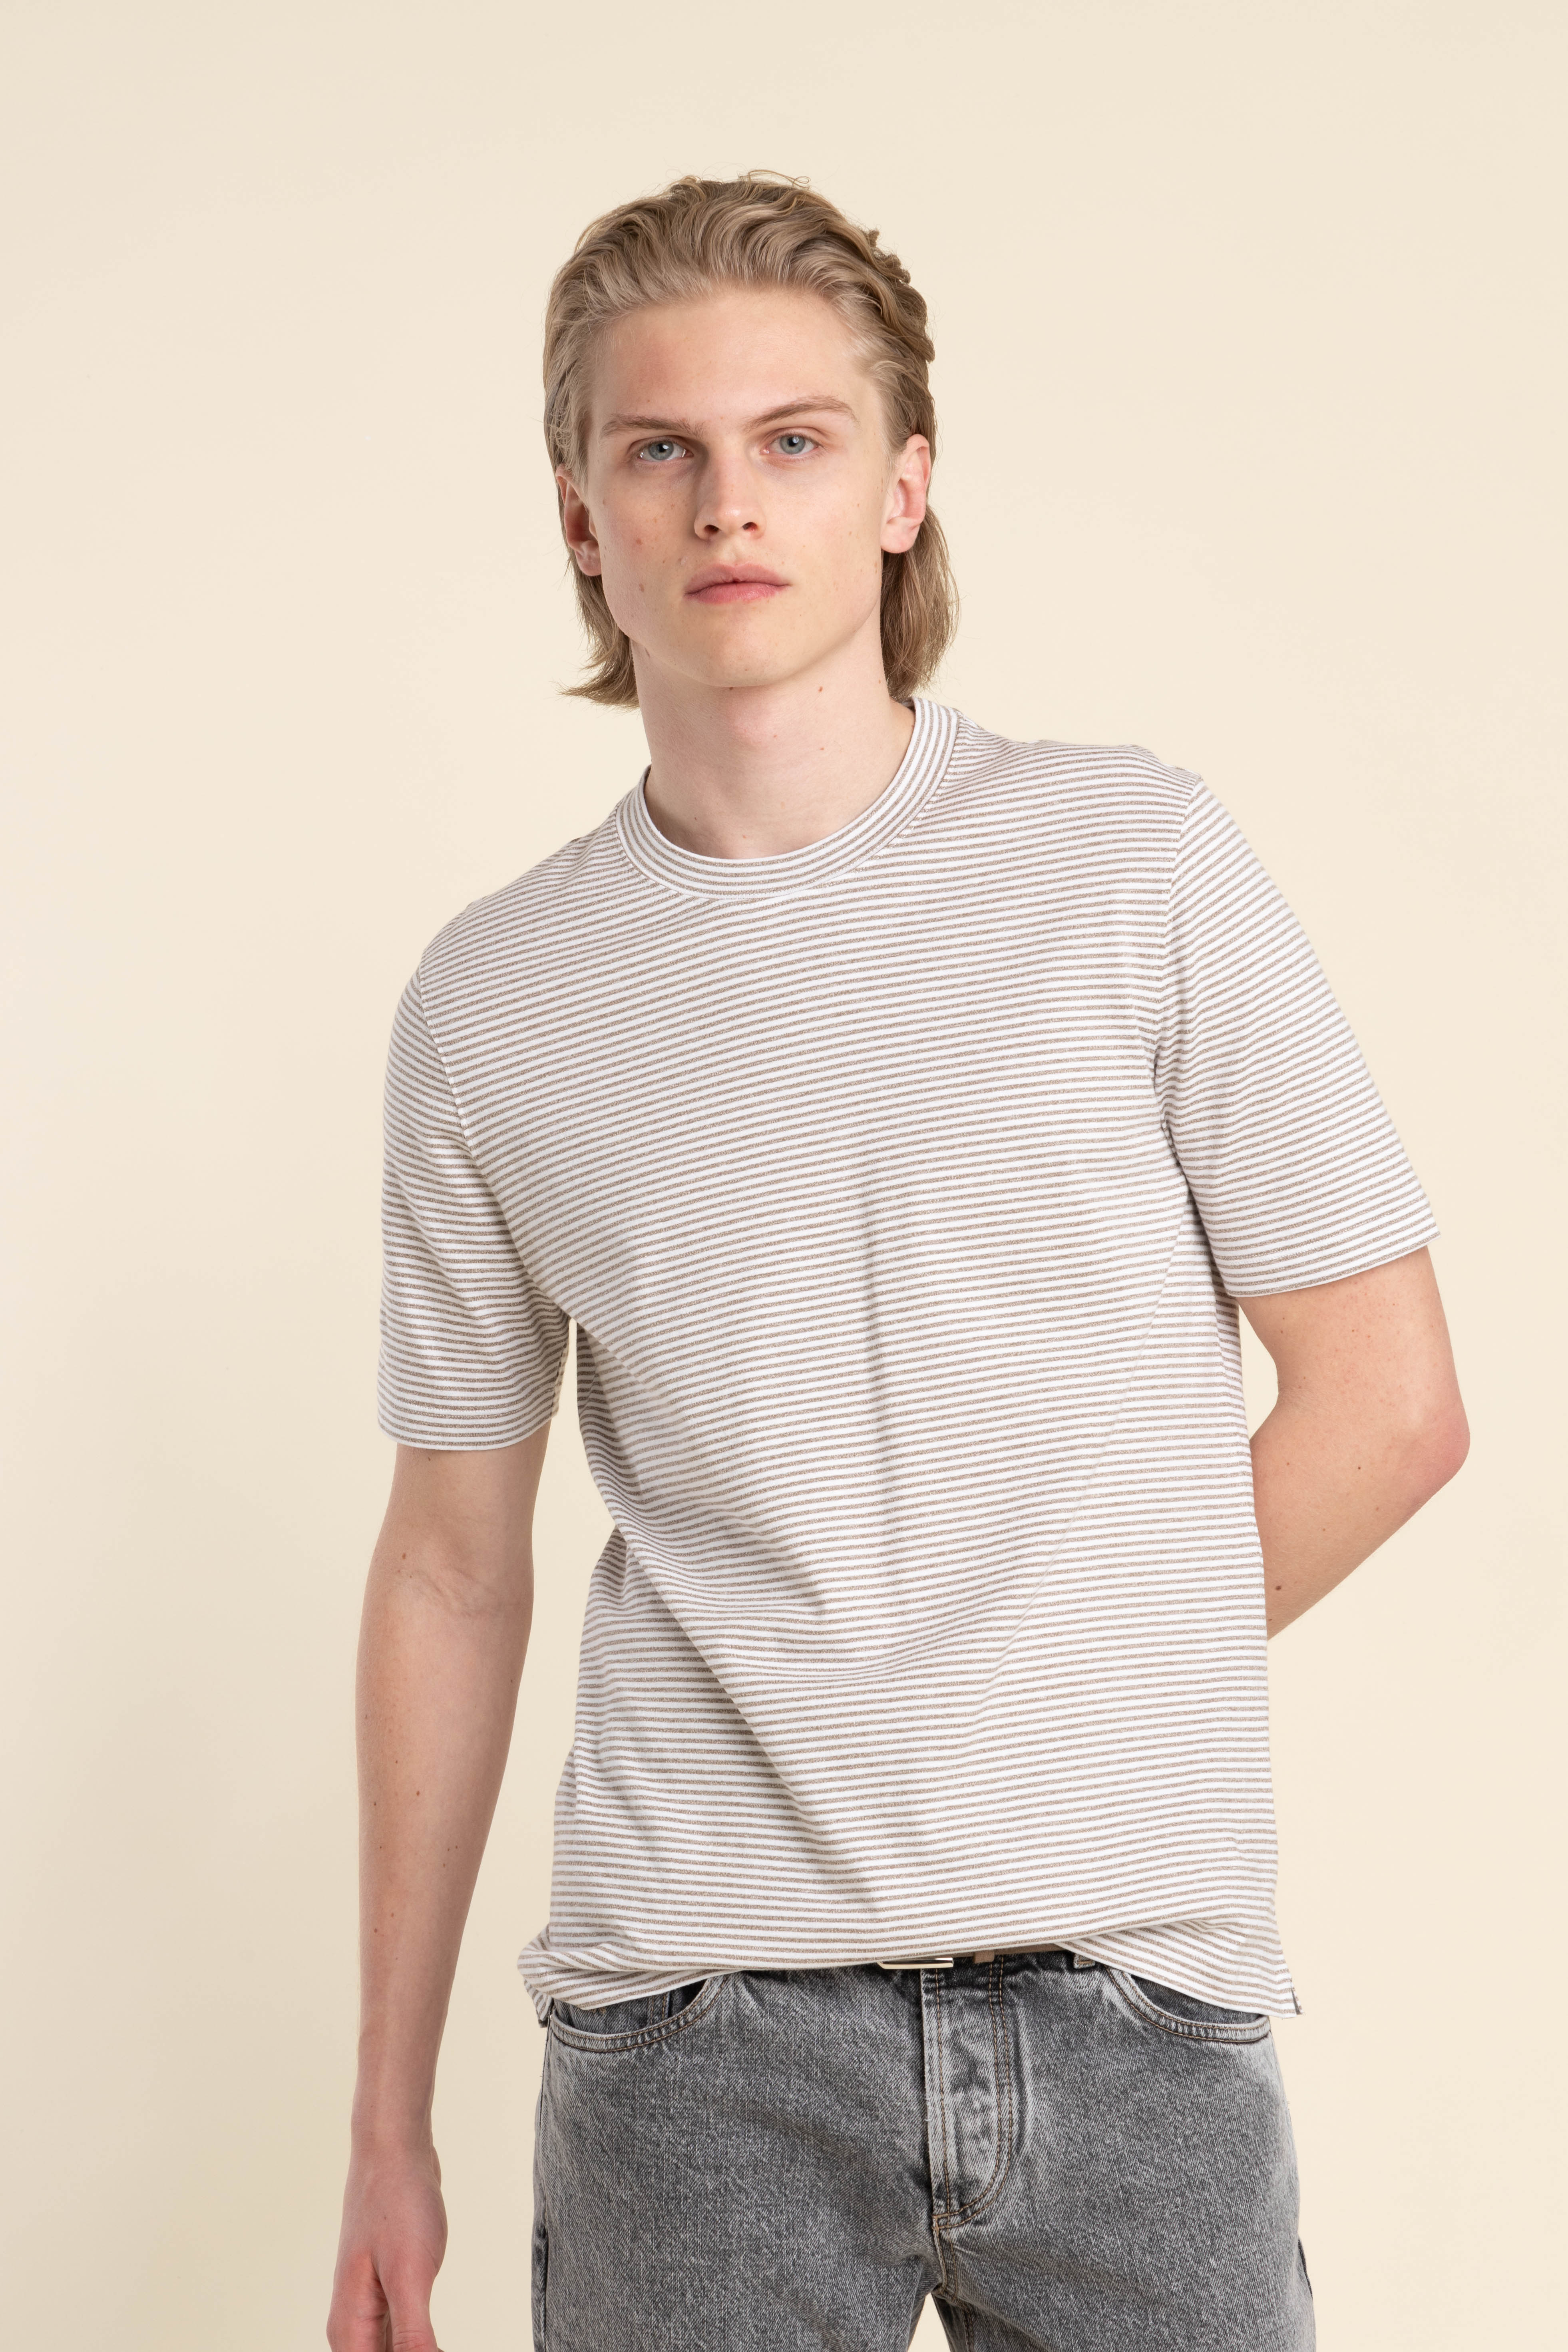 Cotton and Linen T-Shirt – The Helm Clothing